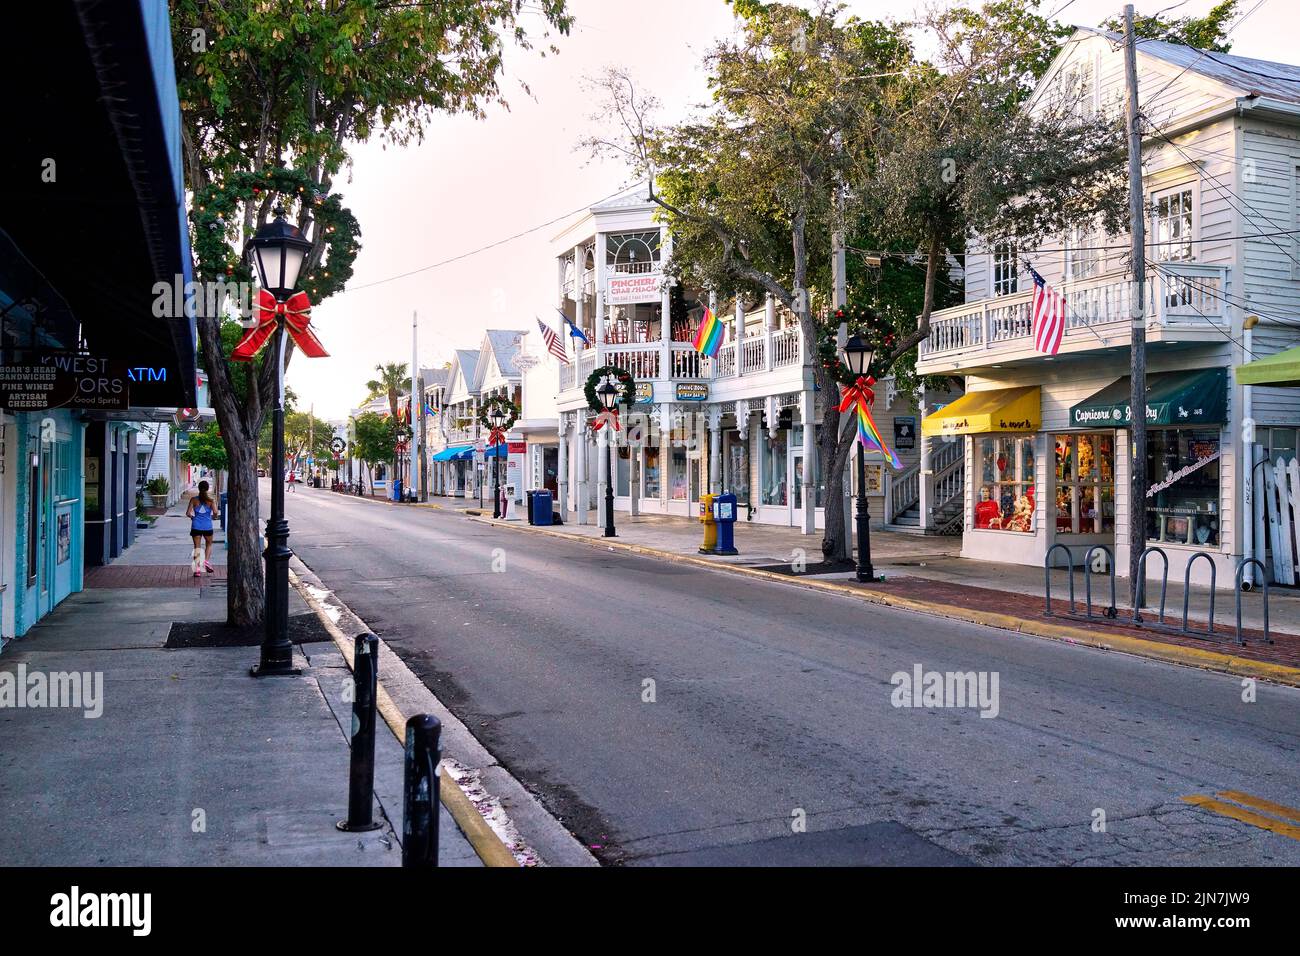 Early morning view of Duval Street in Key West, Florida, FL, USA.  Street in empty, no cars, one lonely jogger Stock Photo